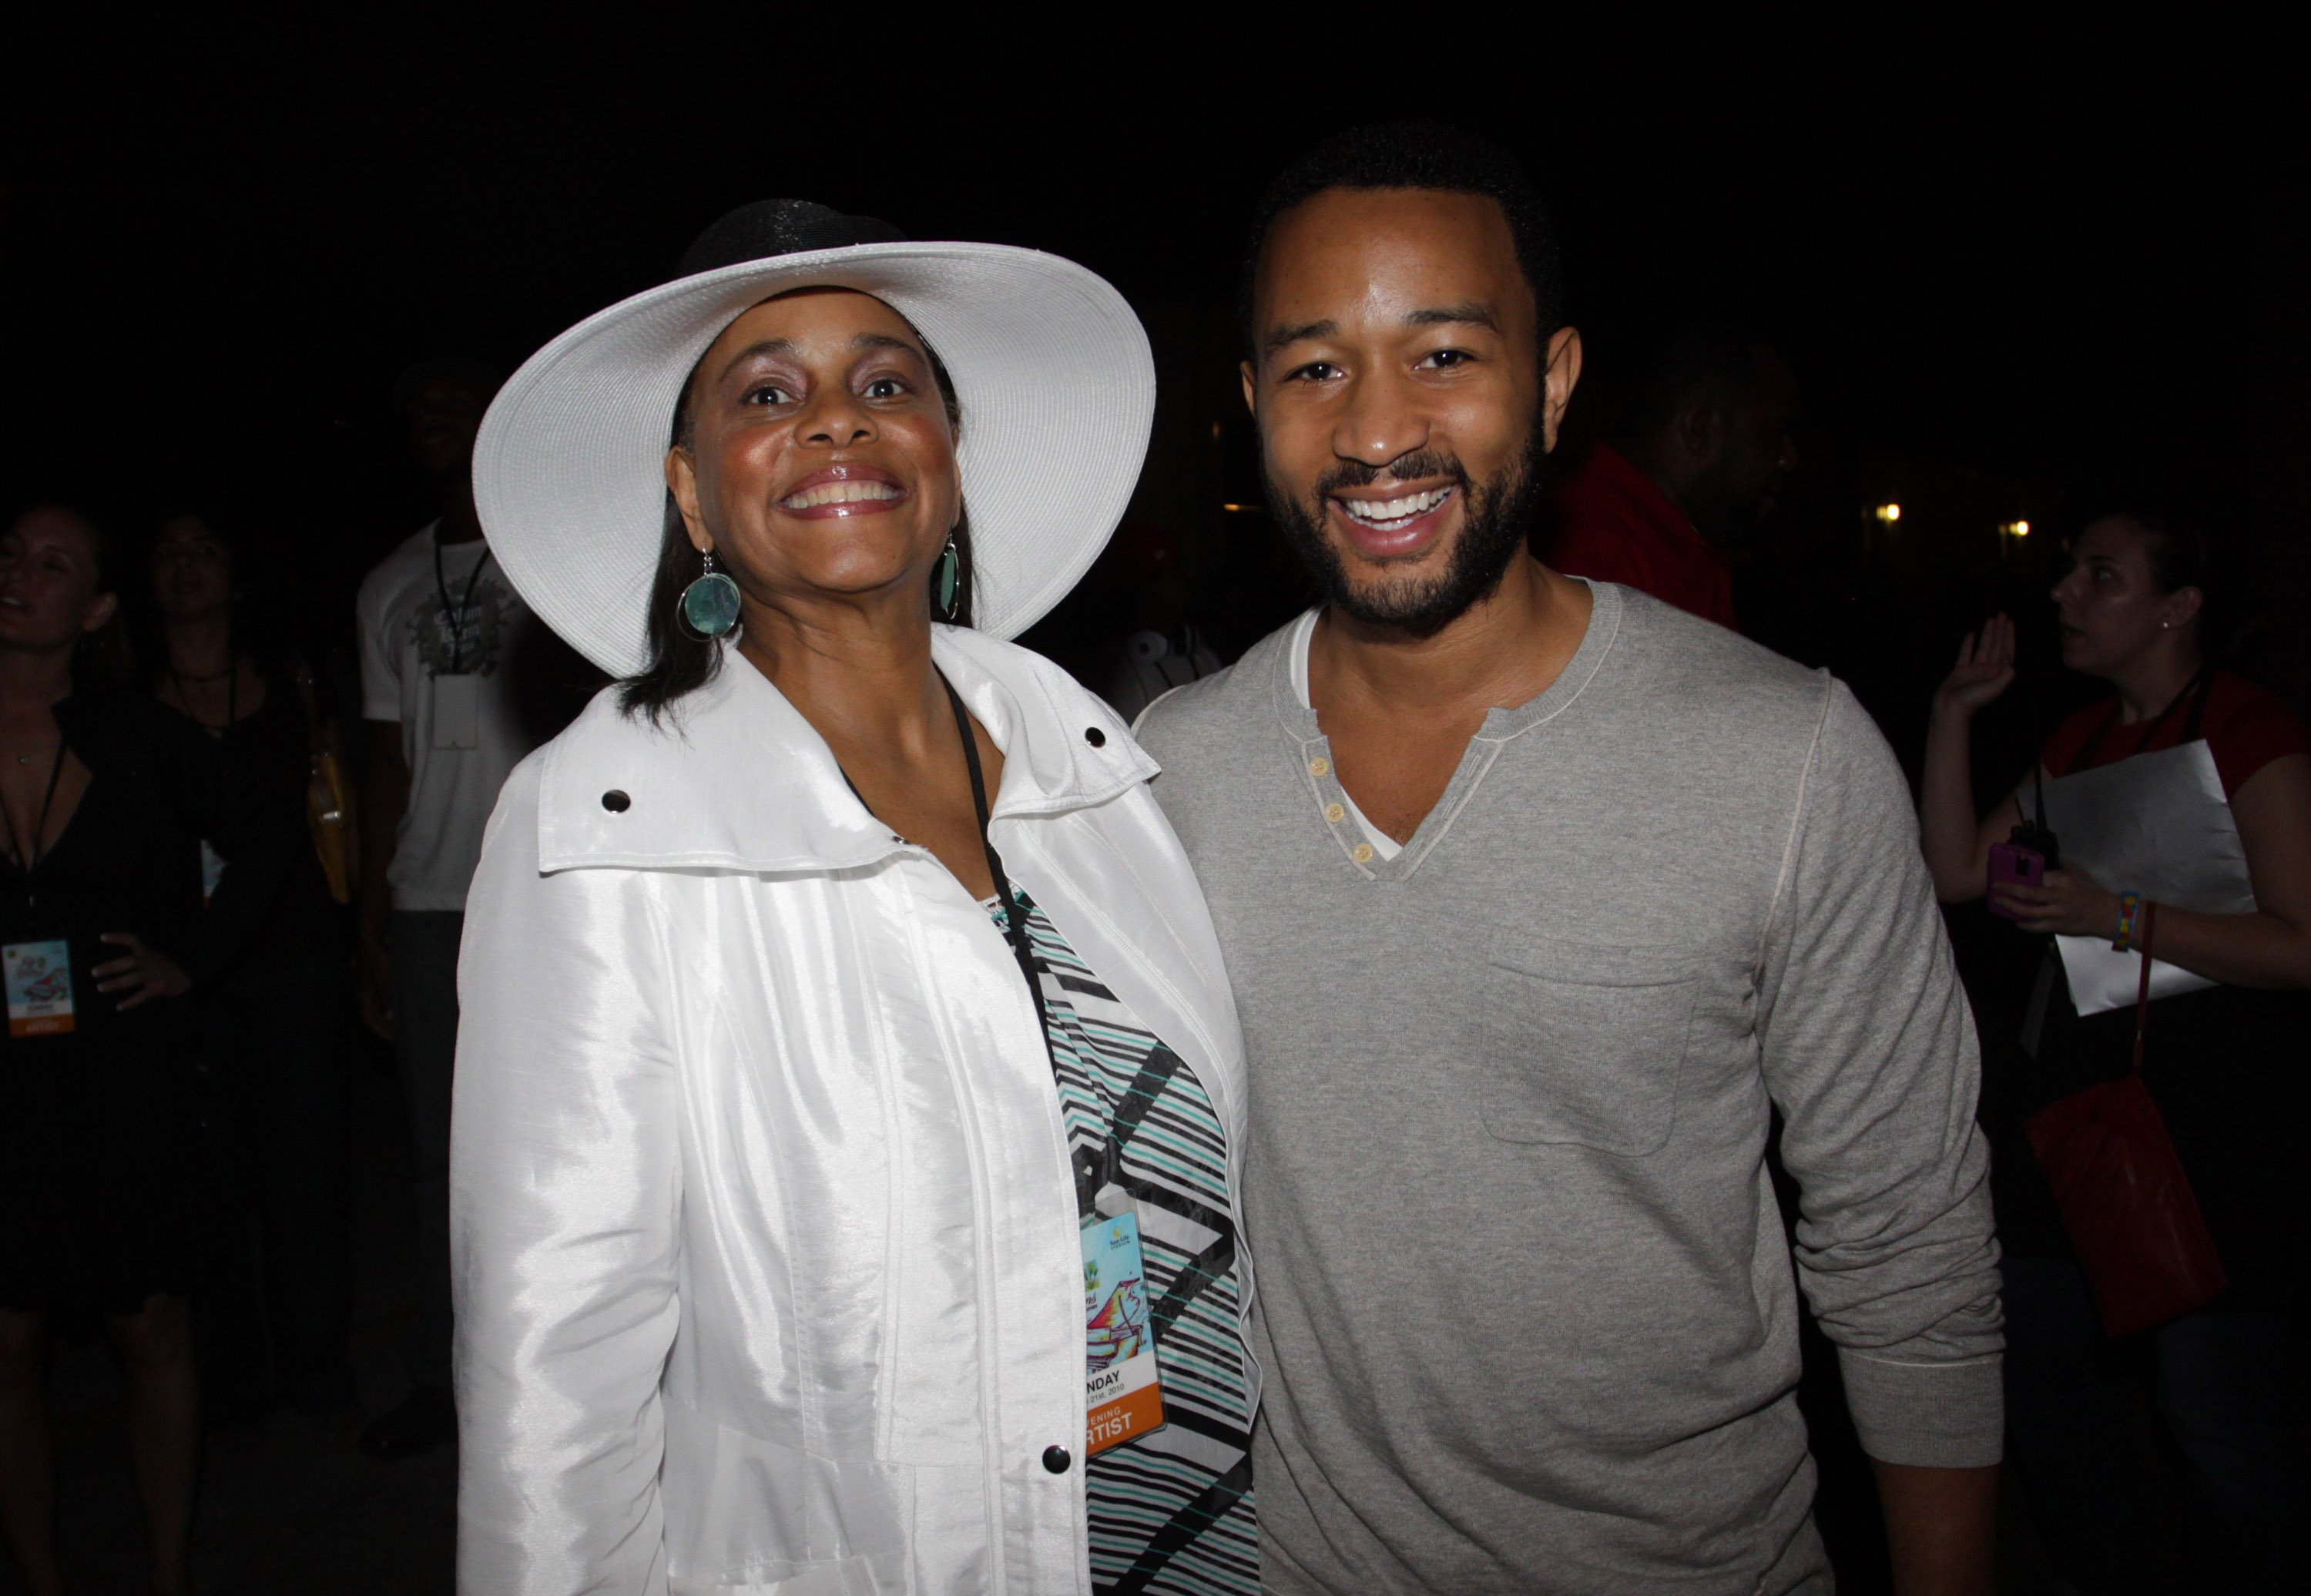 John Legend poses with his mother Phyllis Elaine Stephens at the Jazz In The Gardens 2010 show in Miami Gardens | Getty Images